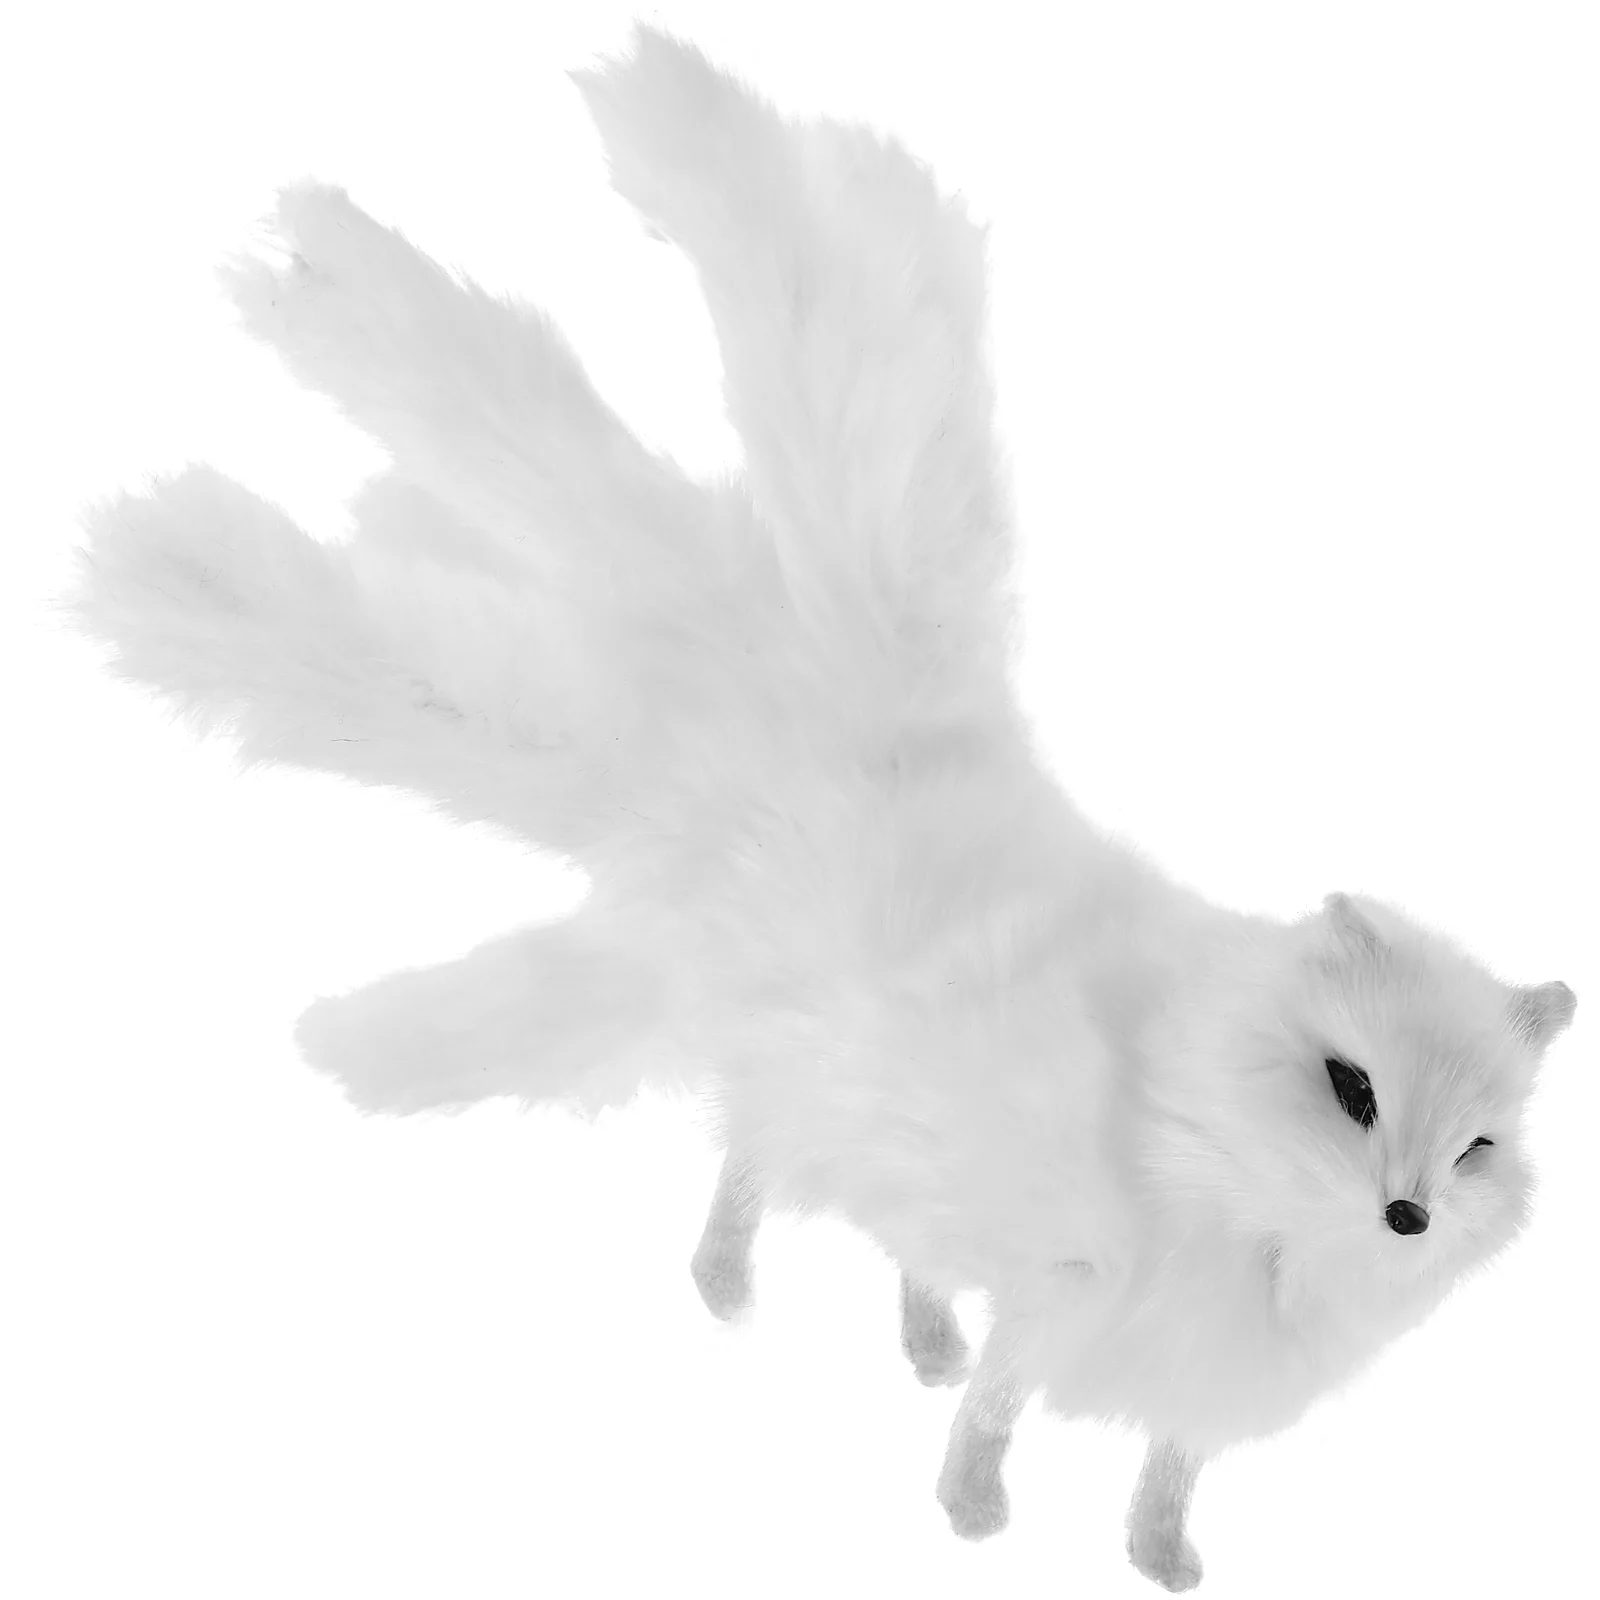 Childrens Toys Simulation Fox Animal Model Portable Foxes Childrens Toys Childrens Toys Modeling Adorable Plush Plaything White original creality cr scan01 portable 3d scanner 3d modeling scanner with turntable and tripod